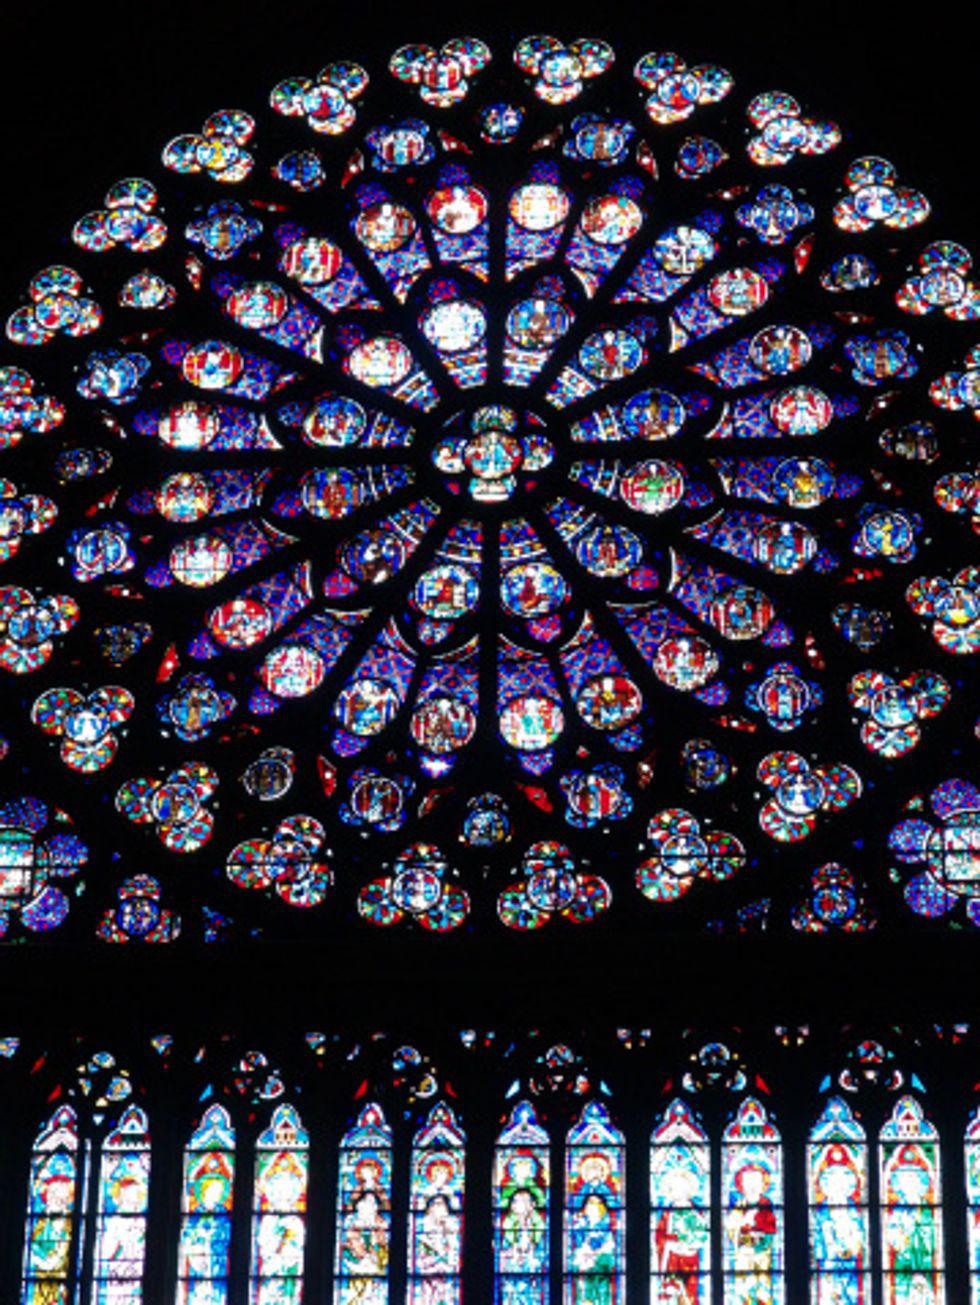 The rose window is an ancient kaleidoscope